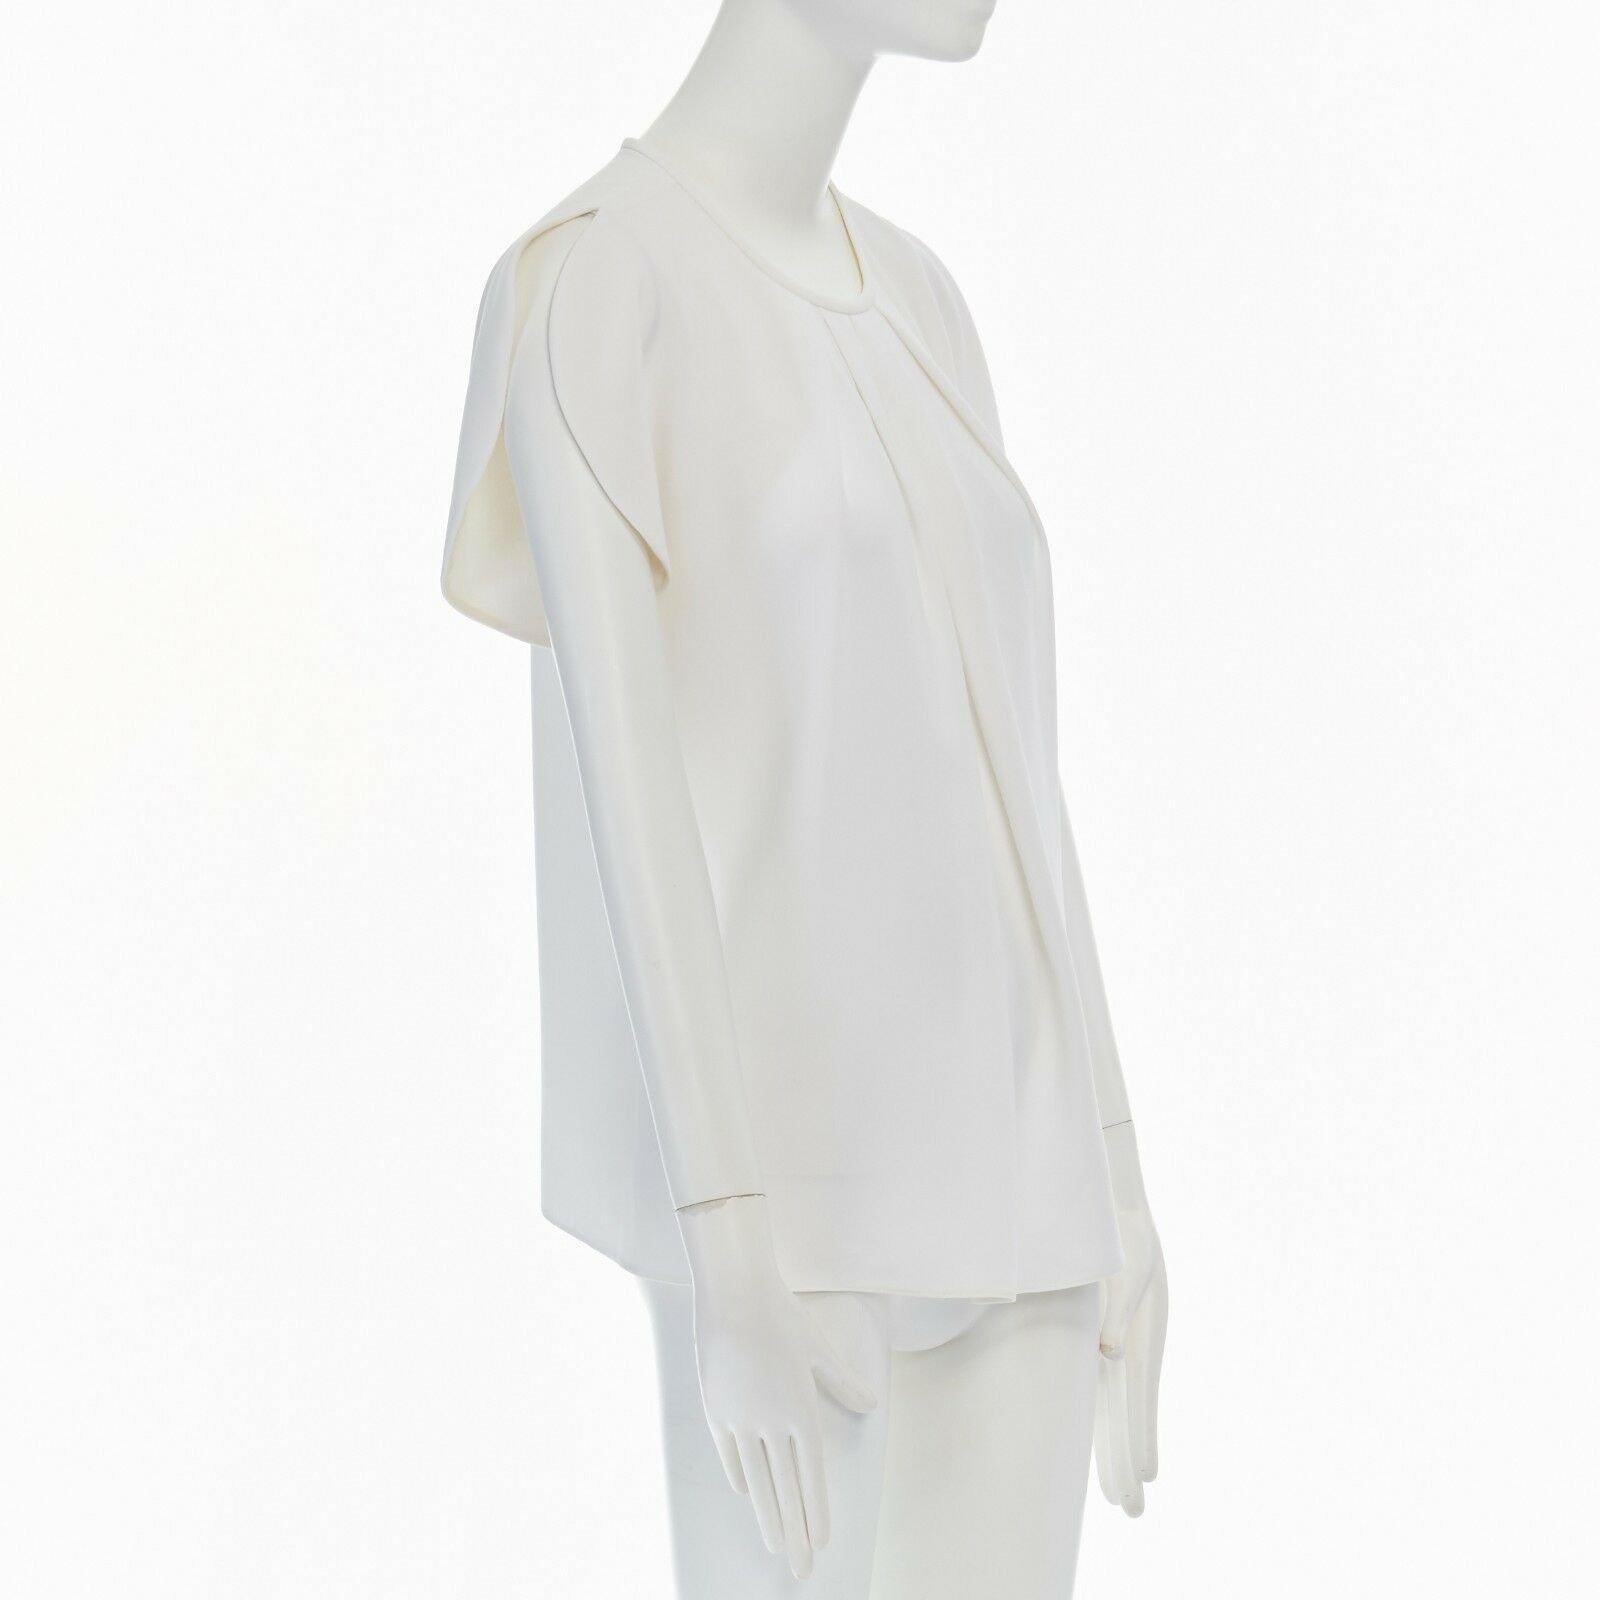 Gray BALENCIAGA 2012 white crepe rounded sleeves blouse top FR36 S